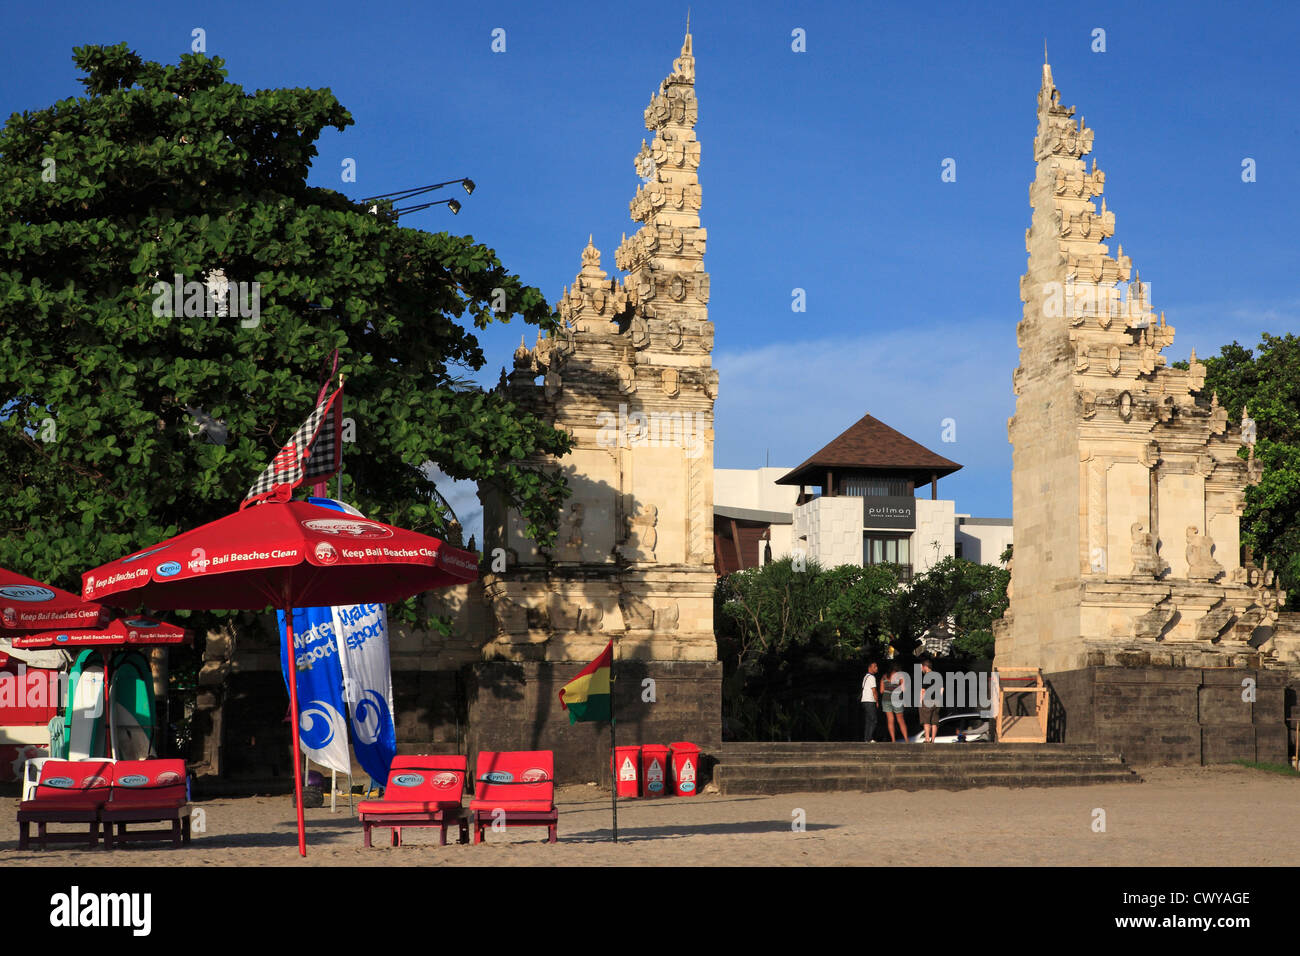 A traditional split gate, called a Candi Bentar, leading to Kuta Legian beach. The Pullman Hotel is in the background. Stock Photo